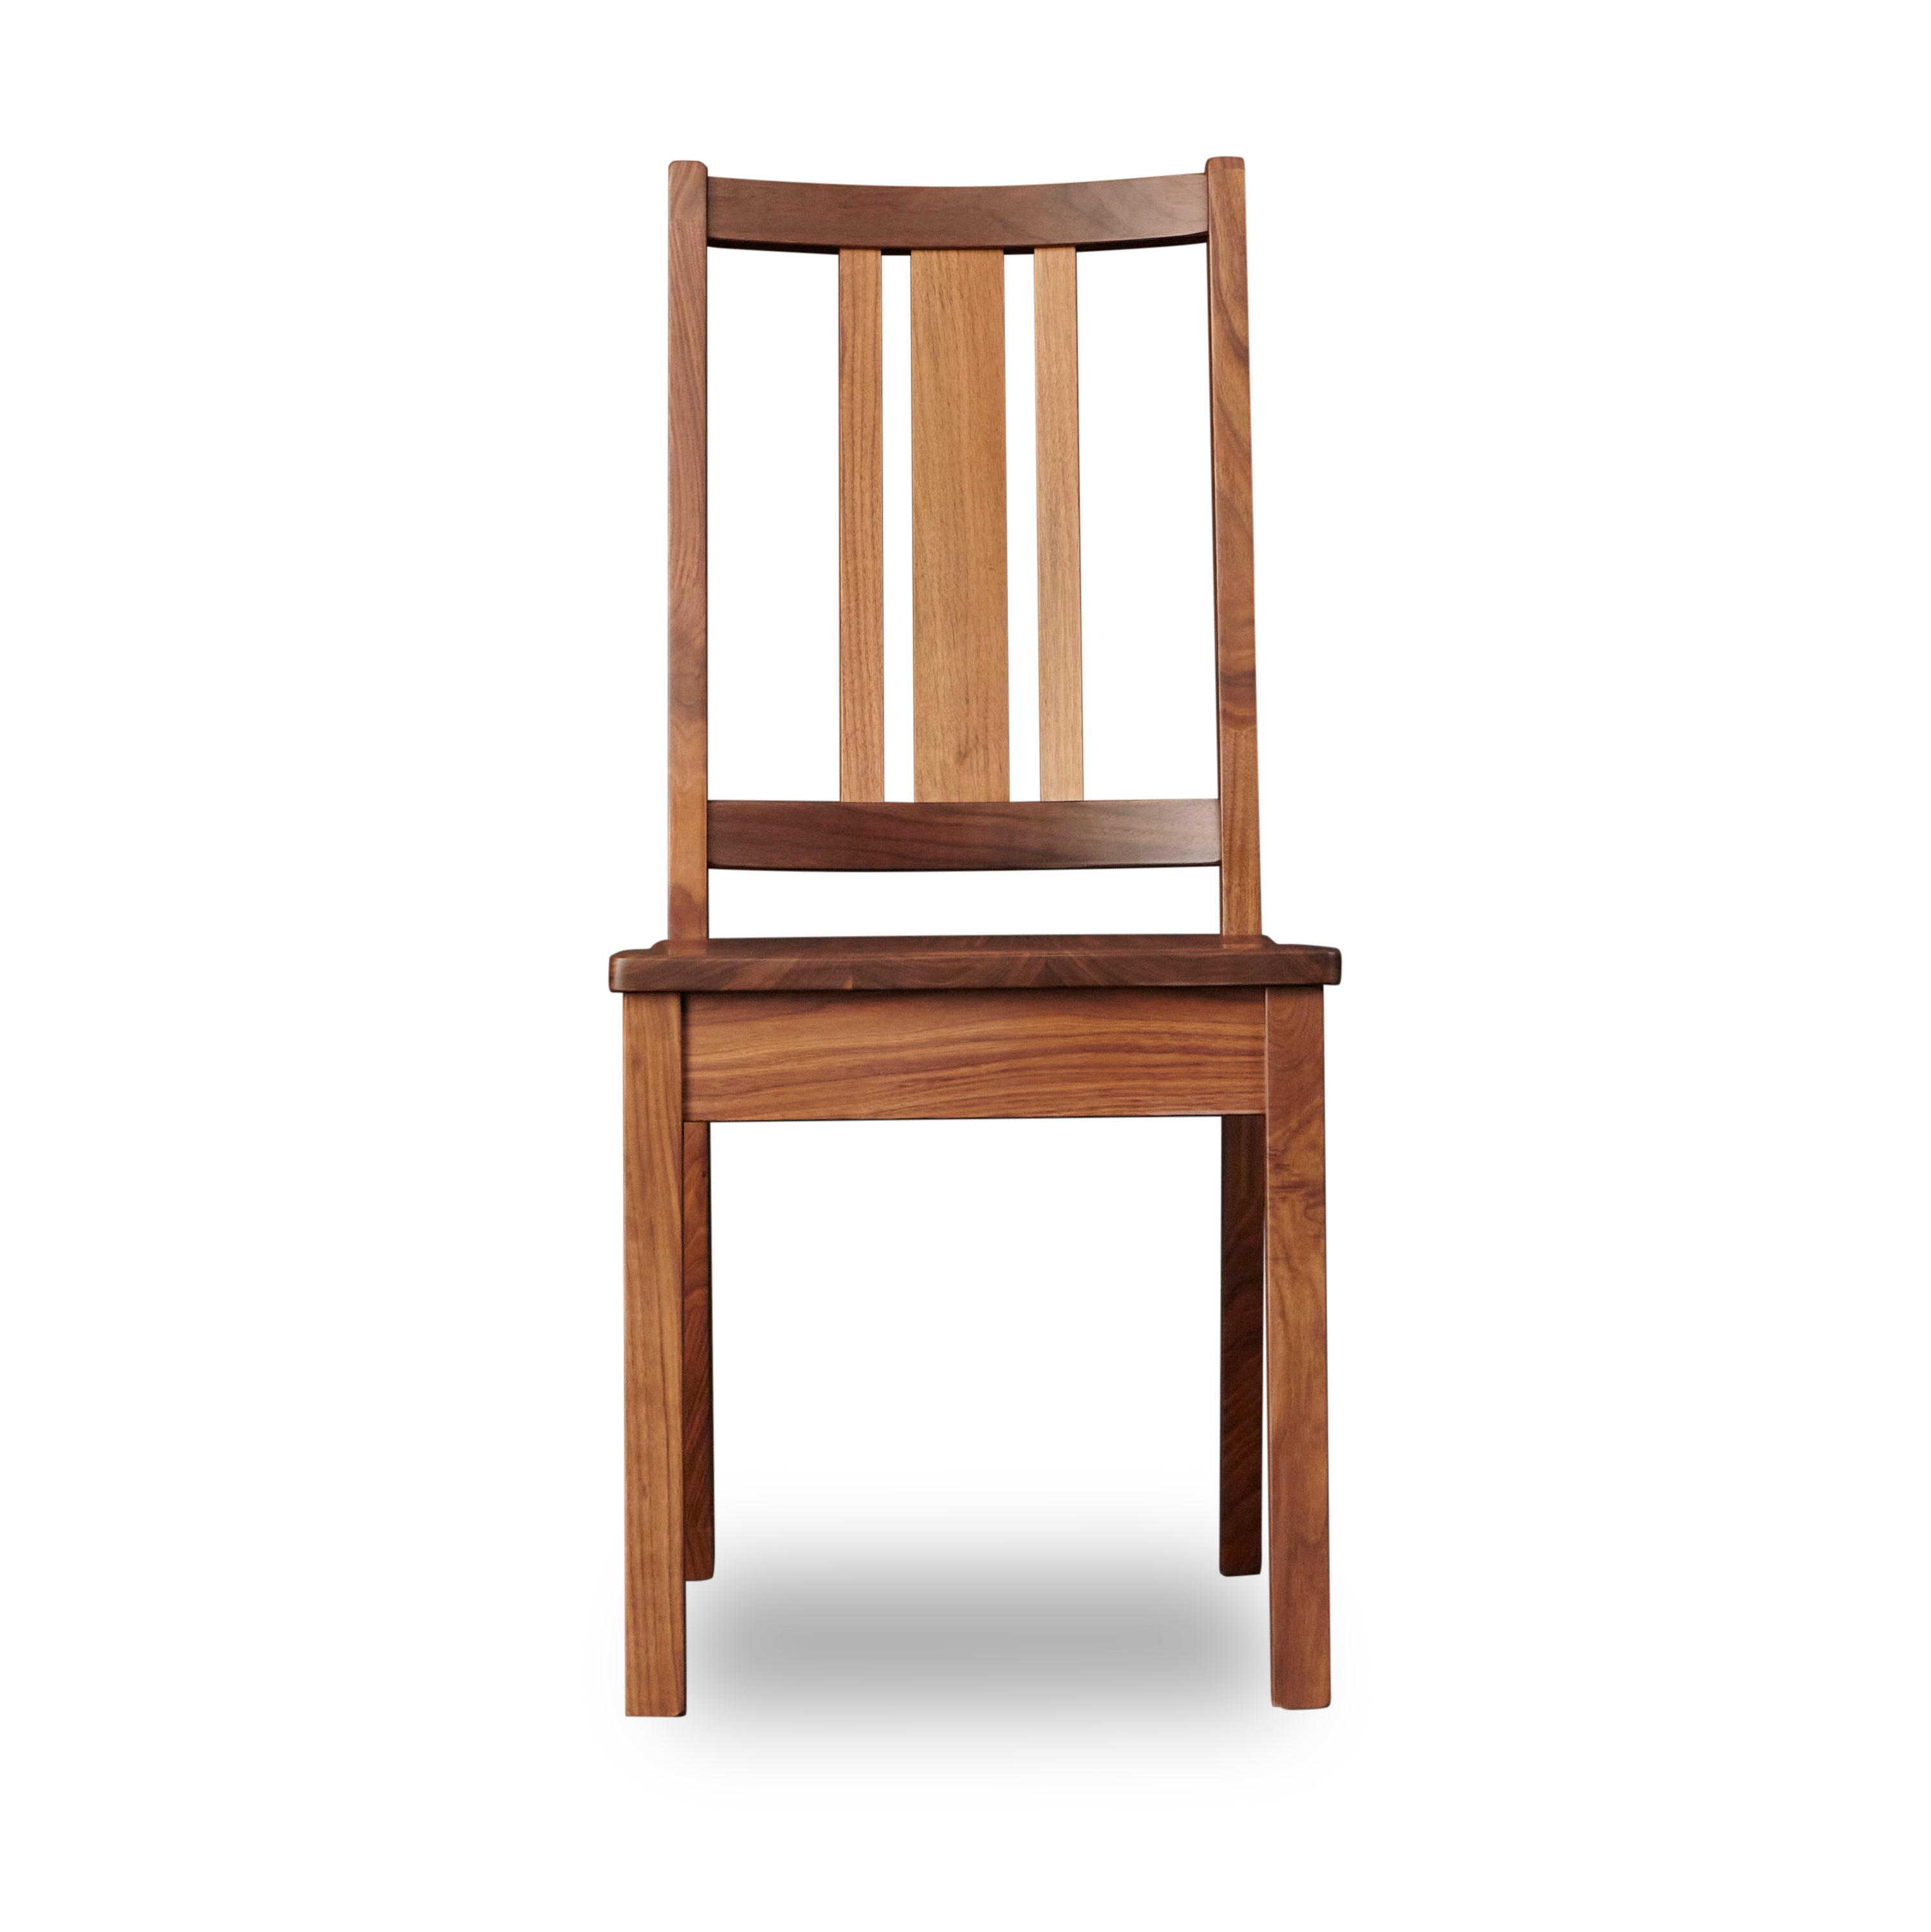 Front view of Saco dining chair in walnut wood from Chilton Furniture